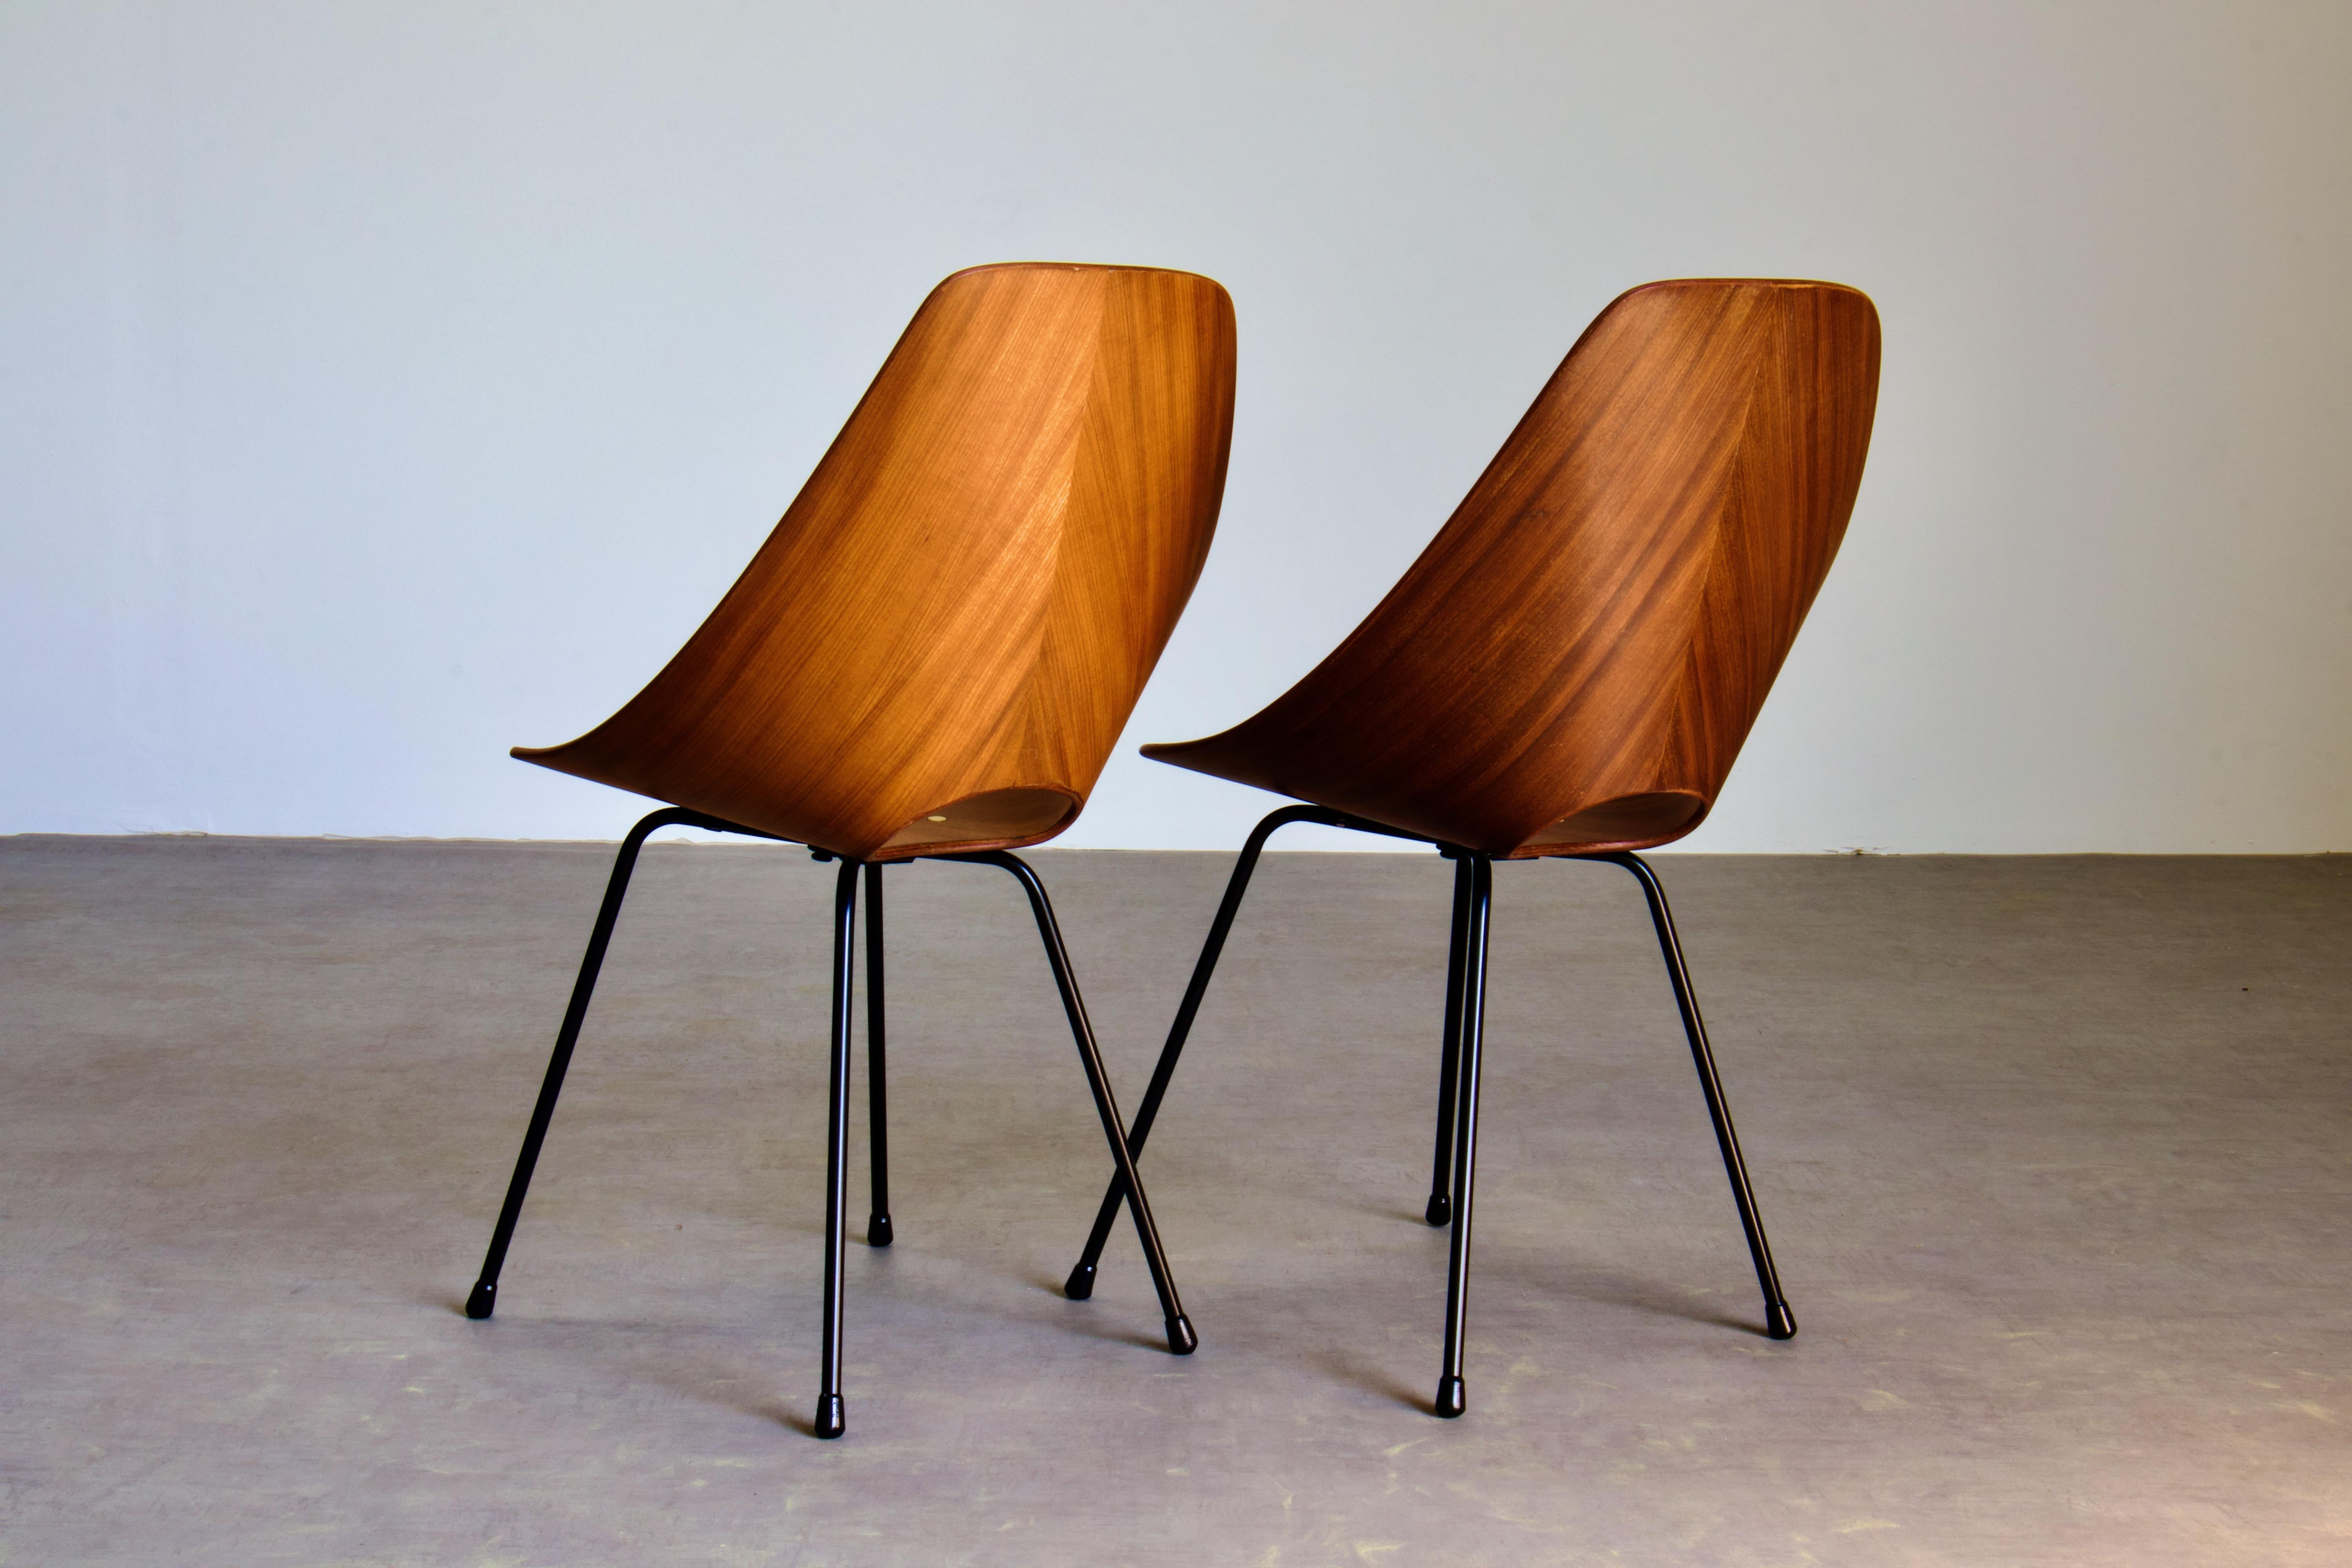 Metal Fully Restored Pair of Medea Side Chairs in Exotic Hardwood, Nobili, 1955 Italy For Sale